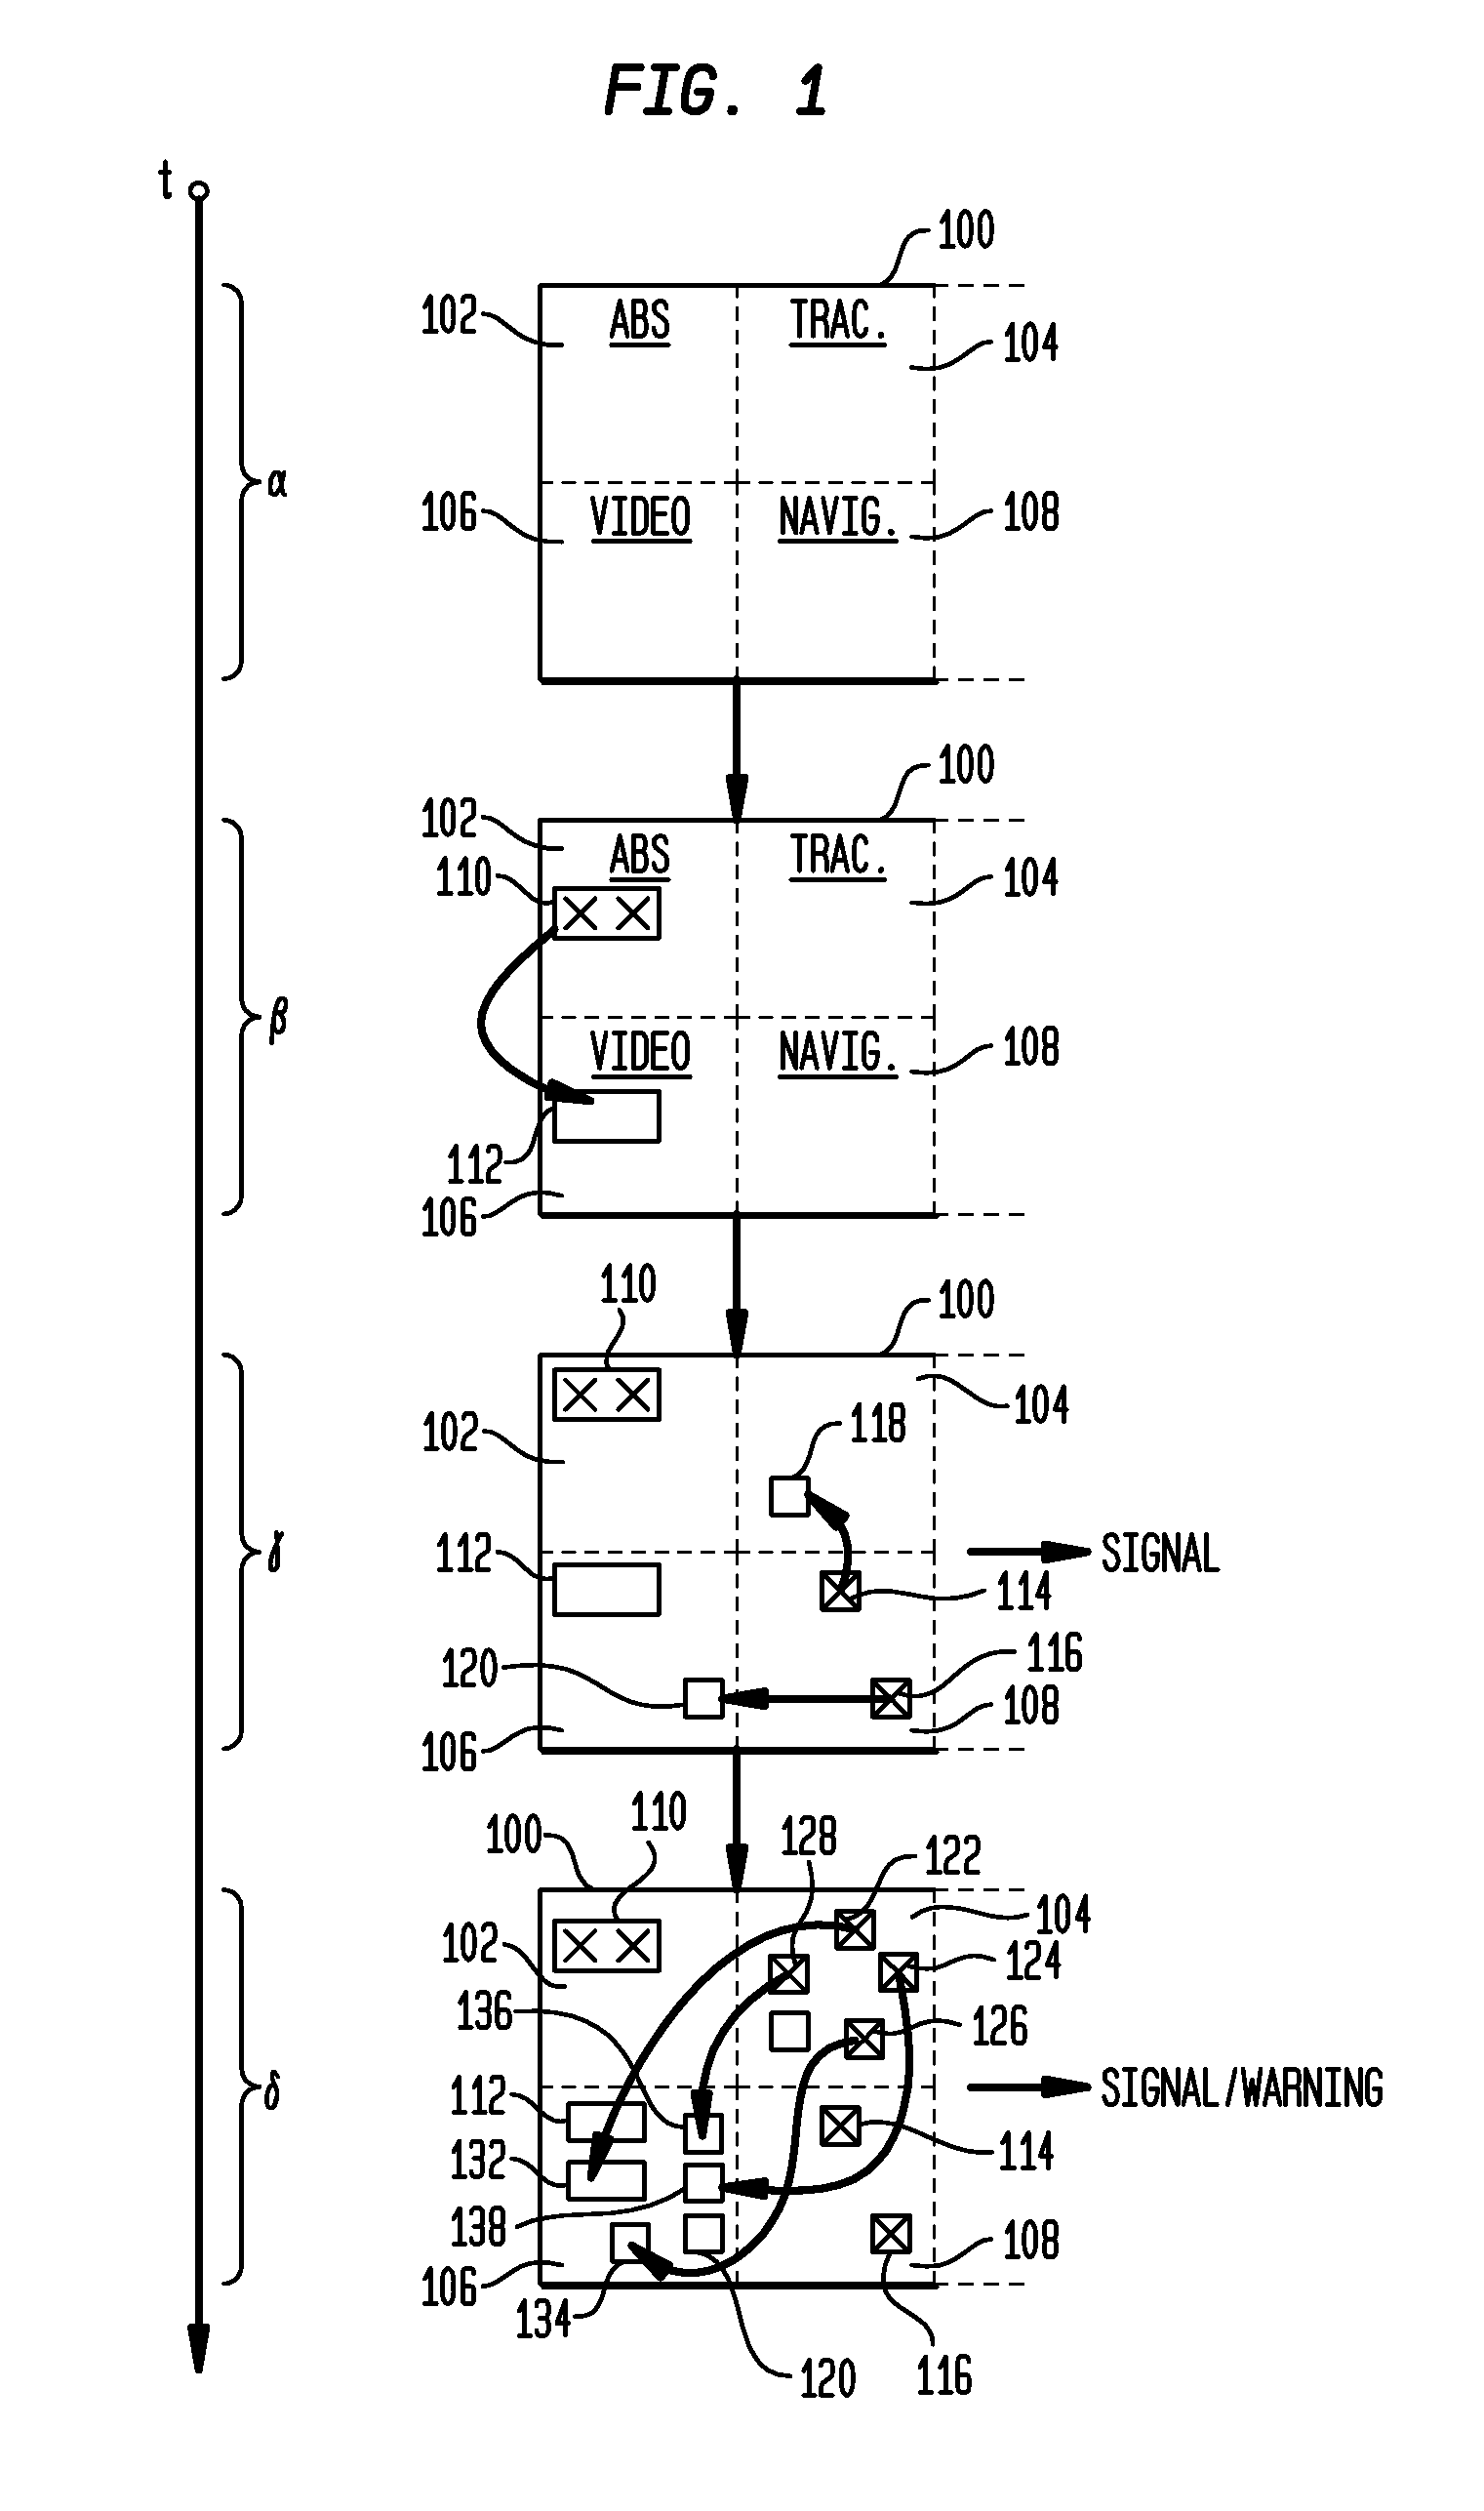 Hierarchically-Scalable Reconfigurable Integrated Circuit Architecture With Unit Delay Modules